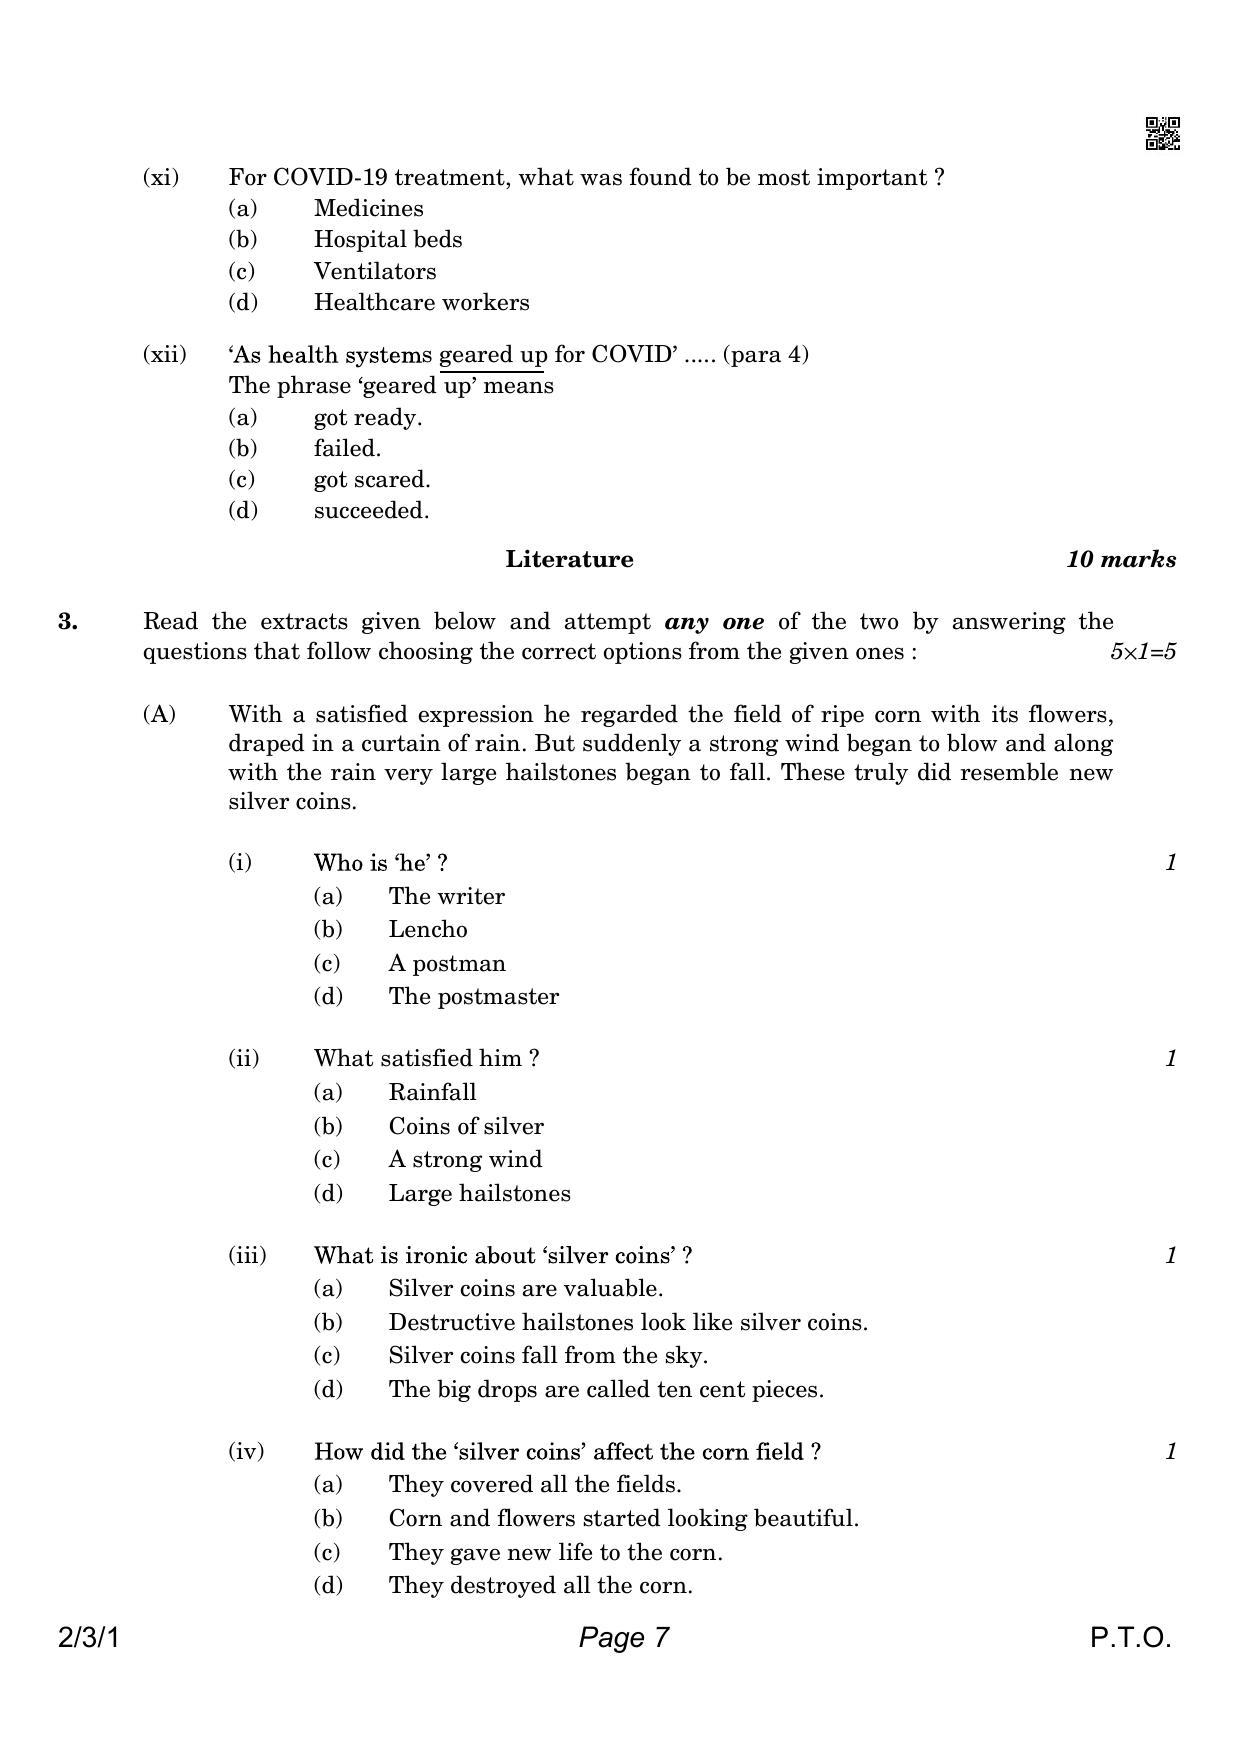 CBSE Class 10 QP_184_ENGLISH_LANGUAGE_AND_LITERATURE 2021 Compartment Question Paper - Page 7